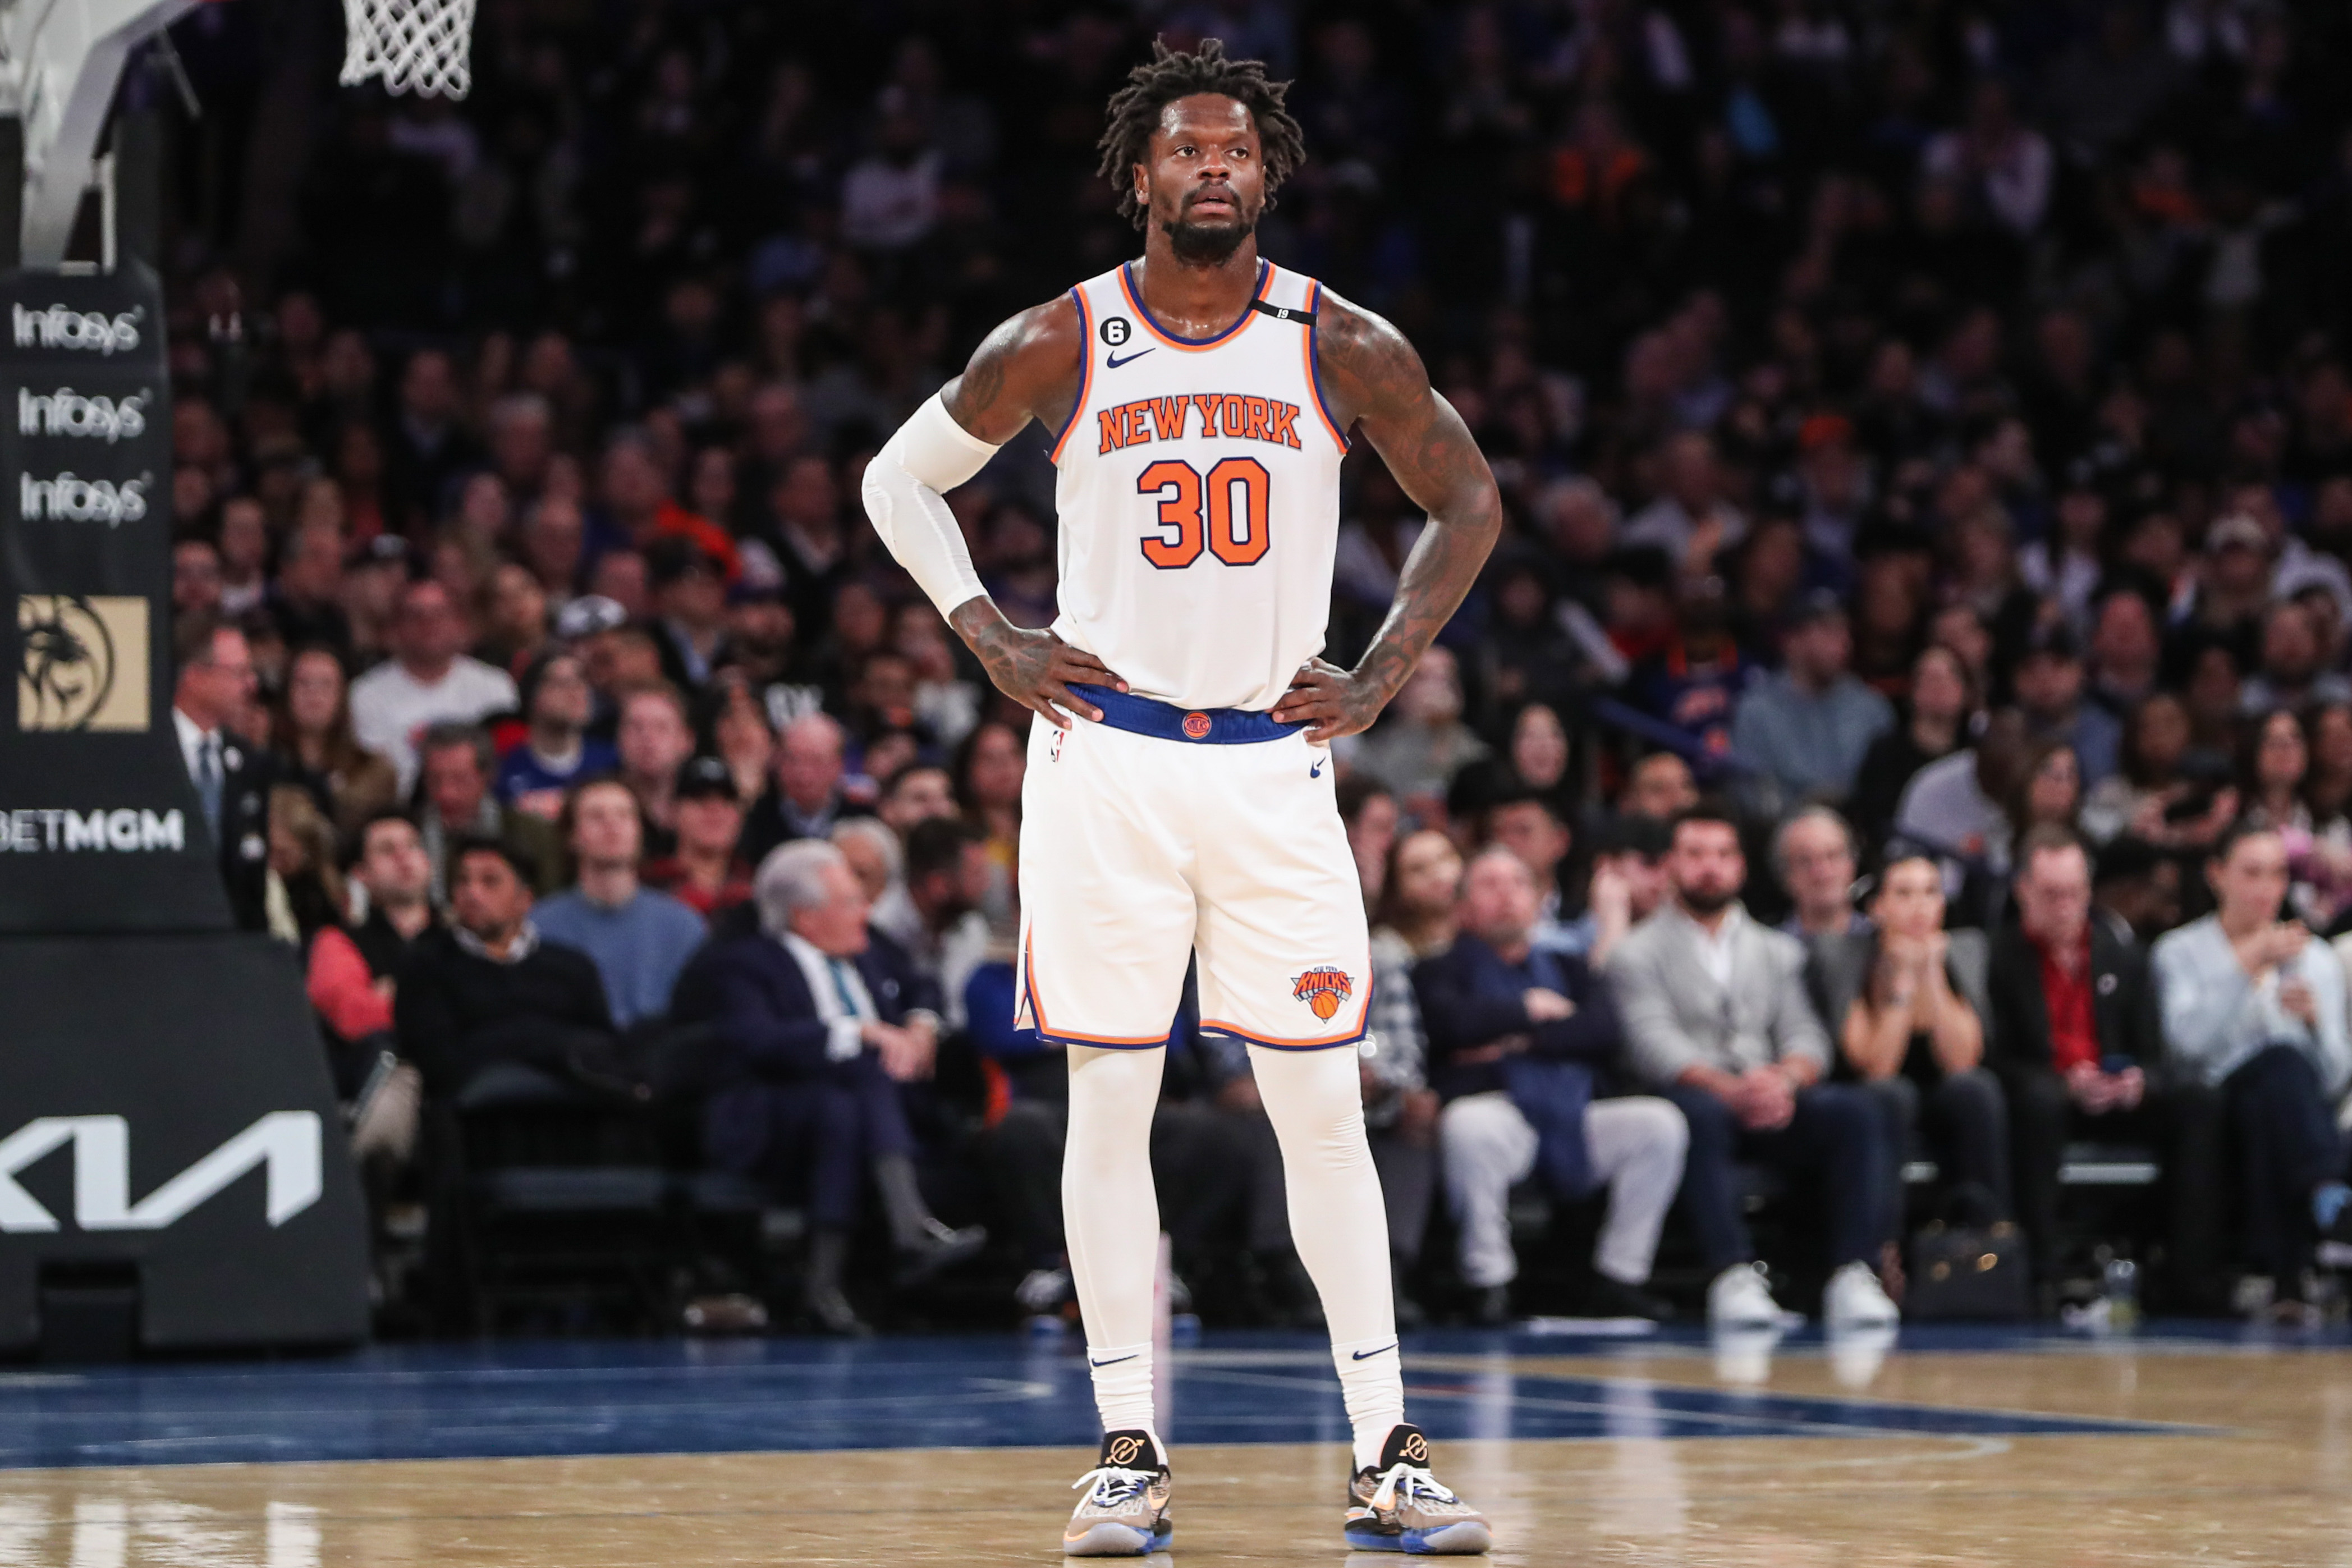 NY Knicks vs. Cleveland Cavaliers odds, picks and predictions Game 2